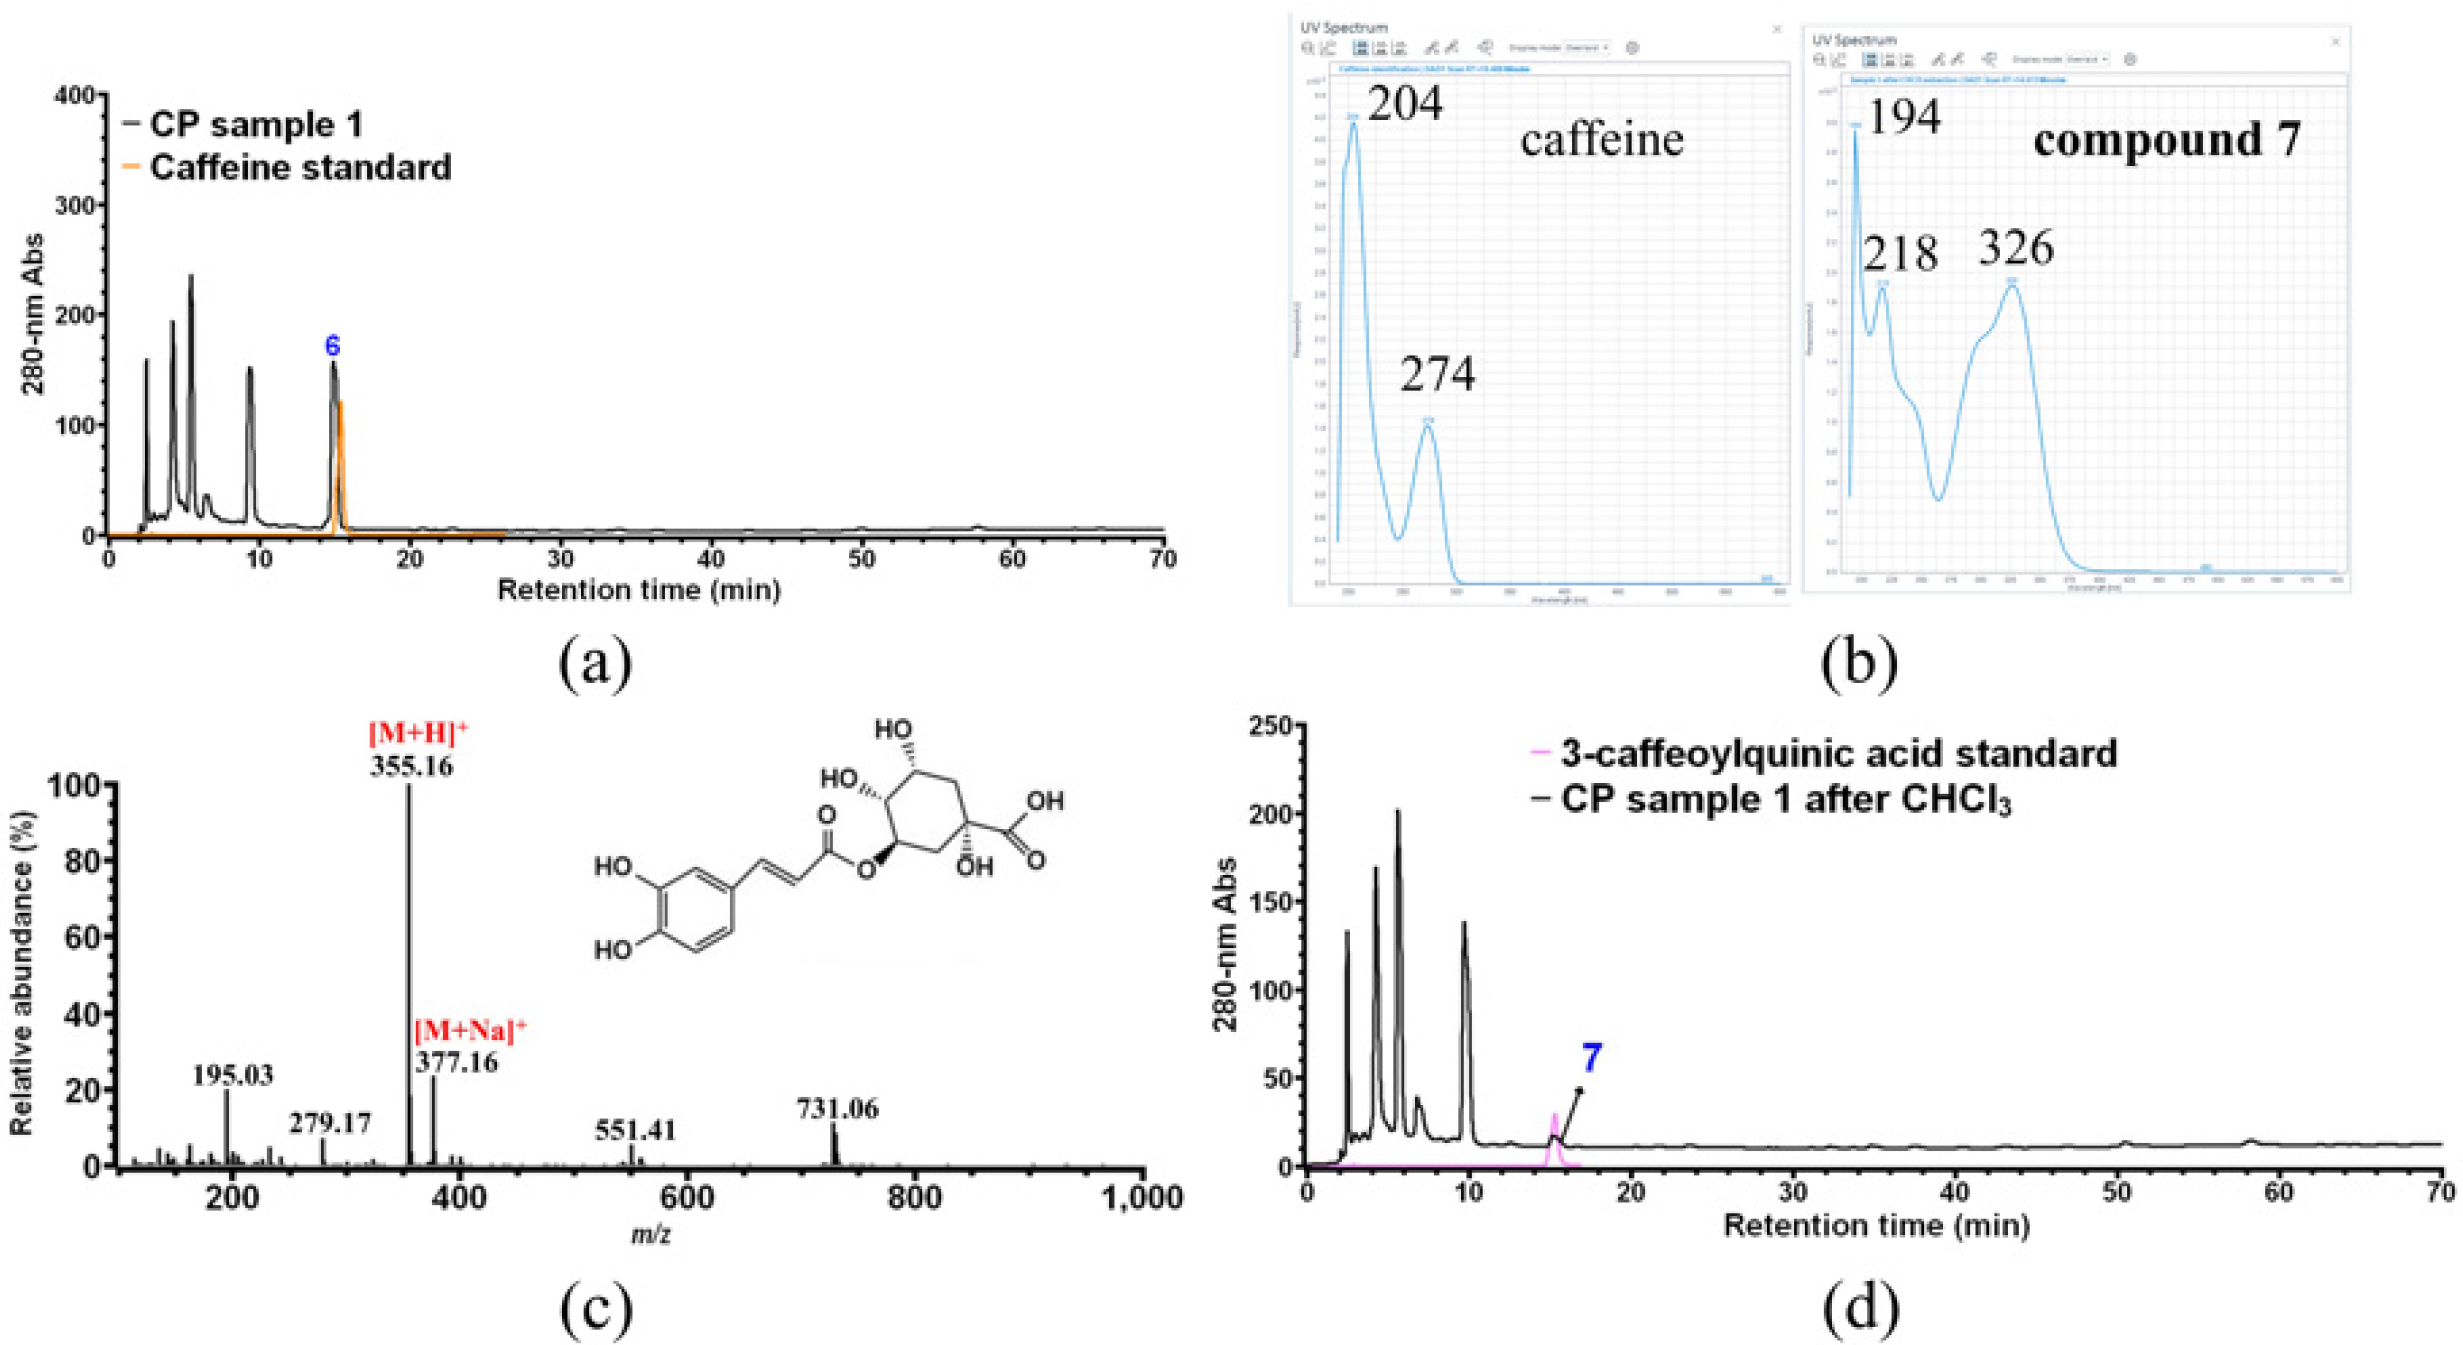 Foods | Free Full-Text | Preliminary Characterization of Phytochemicals and  Polysaccharides in Diverse Coffee Cascara Samples: Identification,  Quantification and Discovery of Novel Compounds | HTML